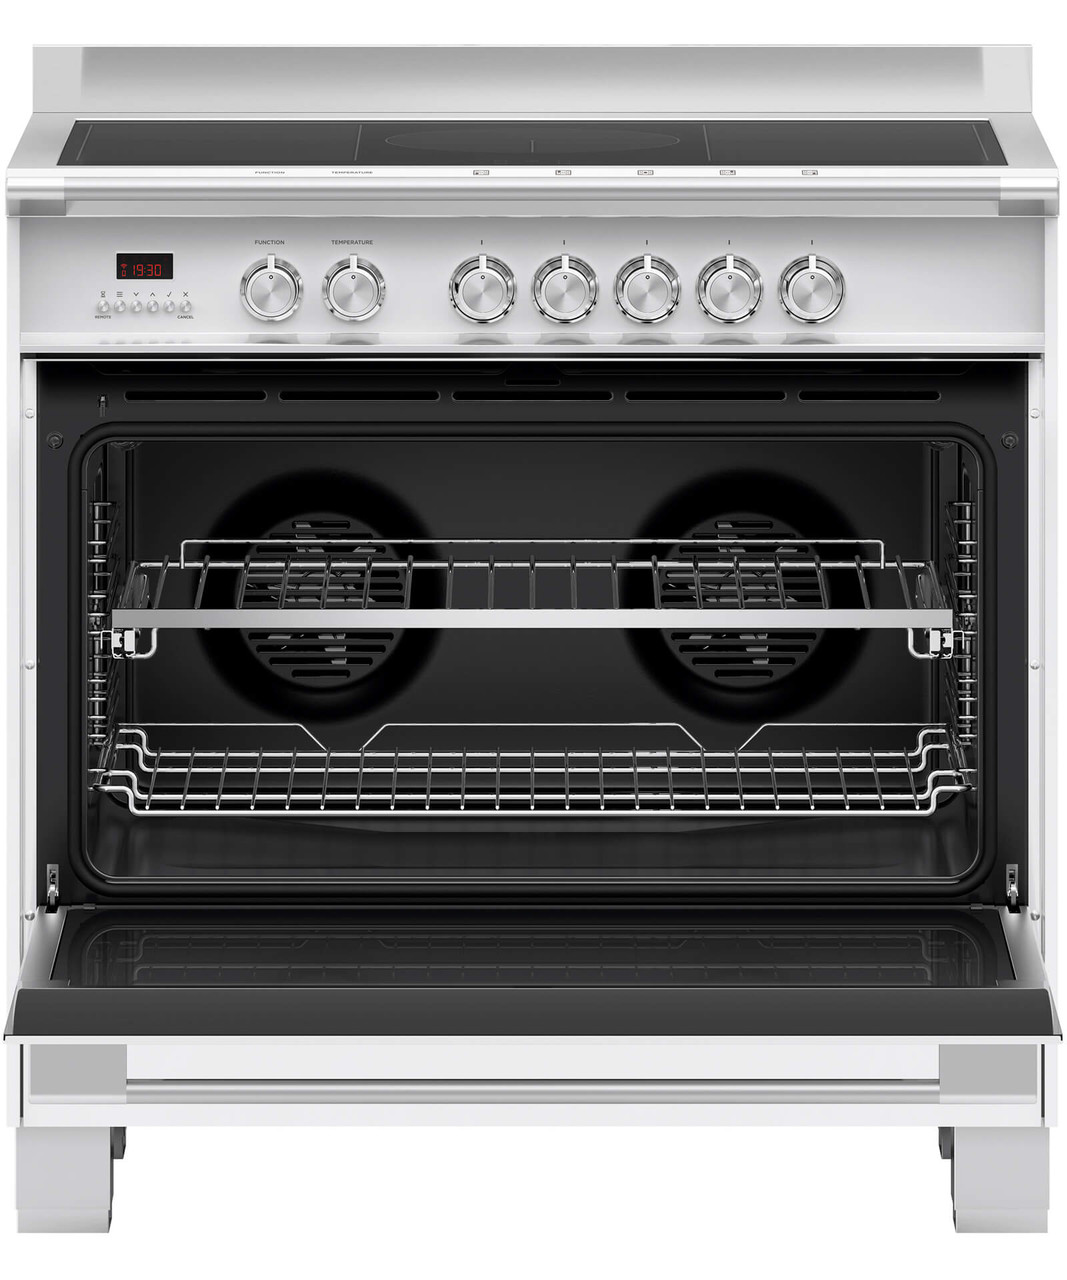 OR90SCI4W1 - 90cm Classic Style Freestanding Cooker, 5 Zone Induction - White